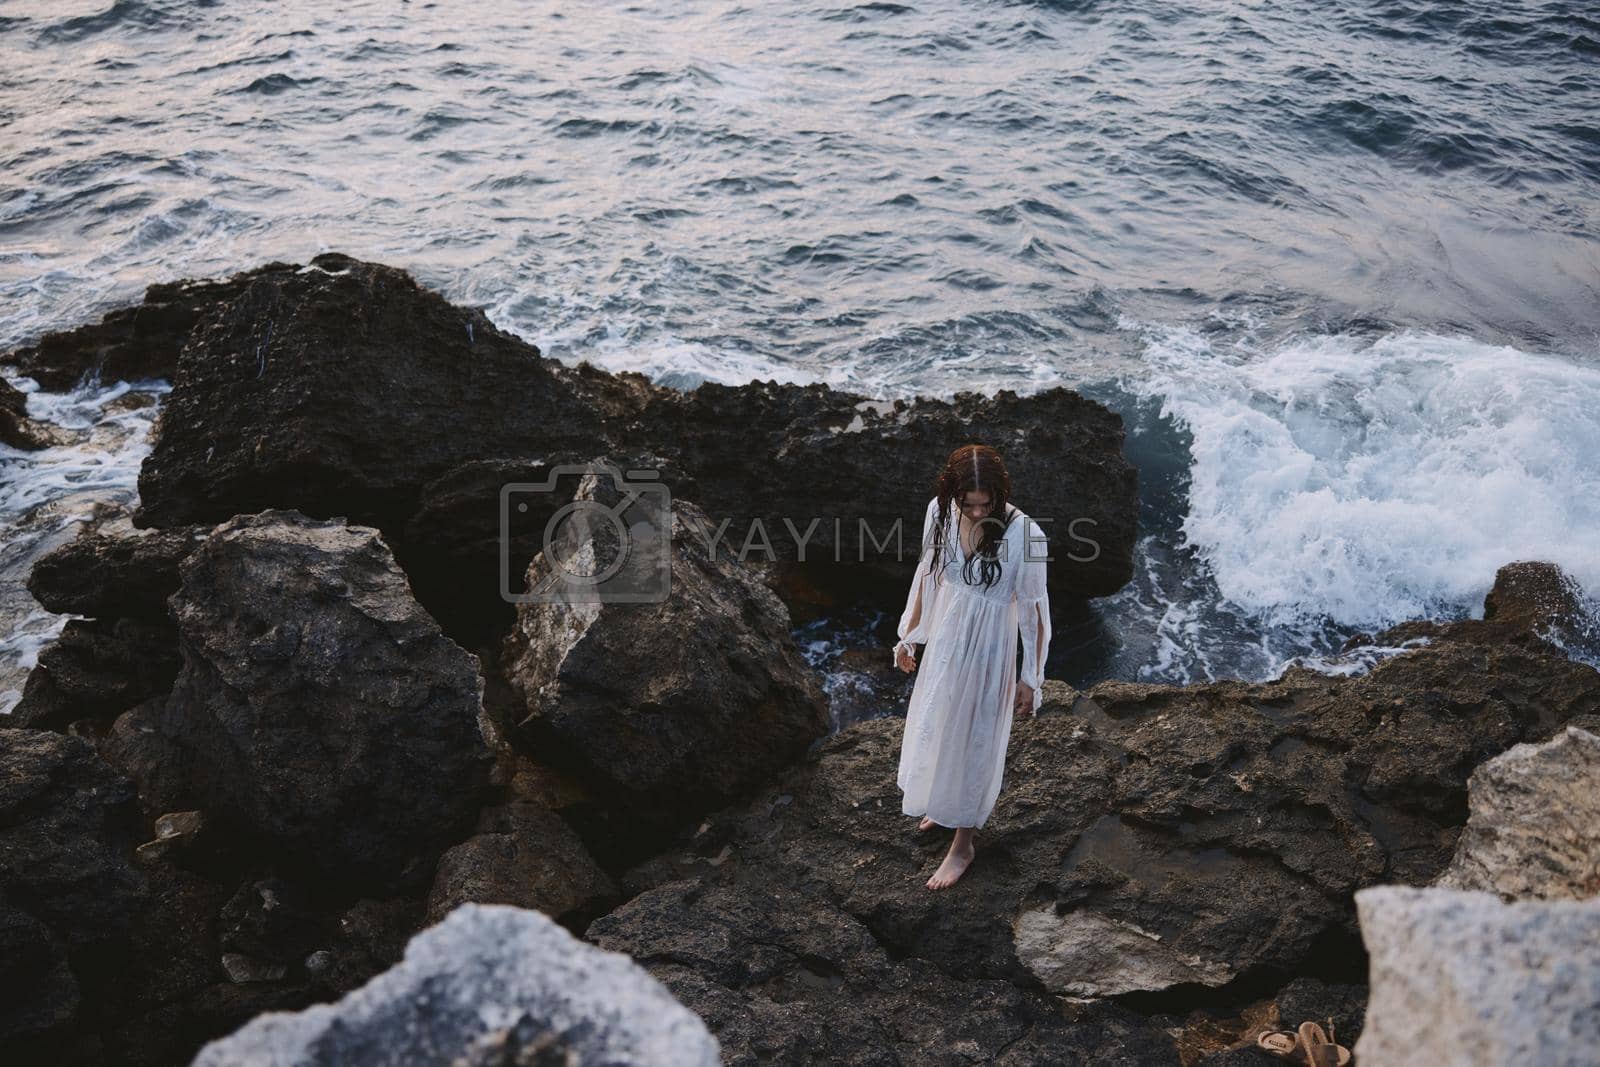 Woman in white dress rocks ocean nature travel. High quality photo